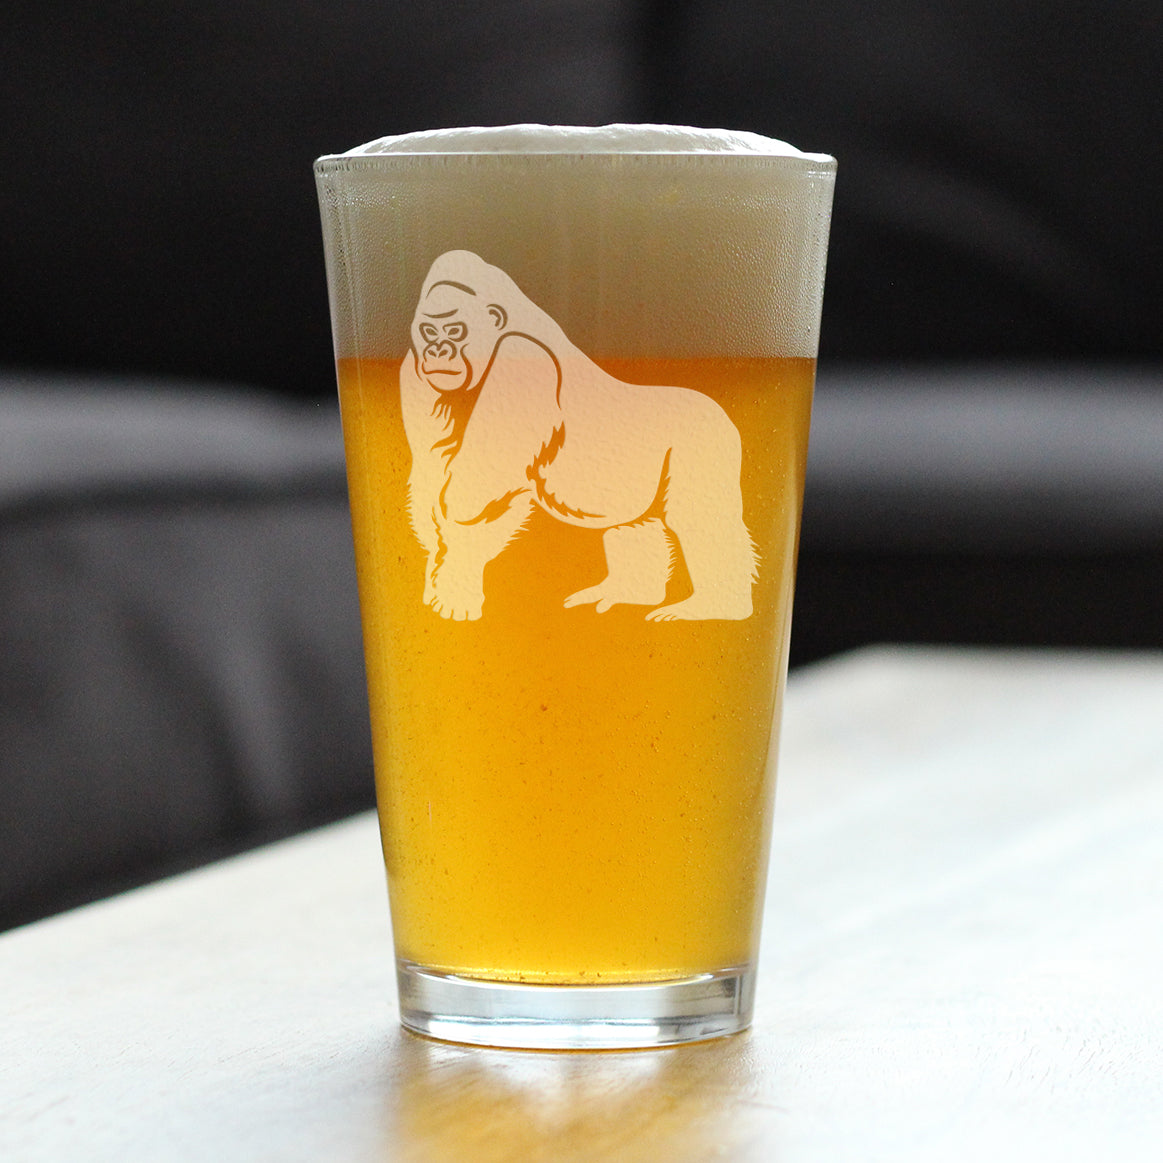 Gorilla Pint Glass for Beer - Fun Wild Animal Themed Decor and Gifts for Lovers of Apes and Monkeys - 16 Oz Glasses